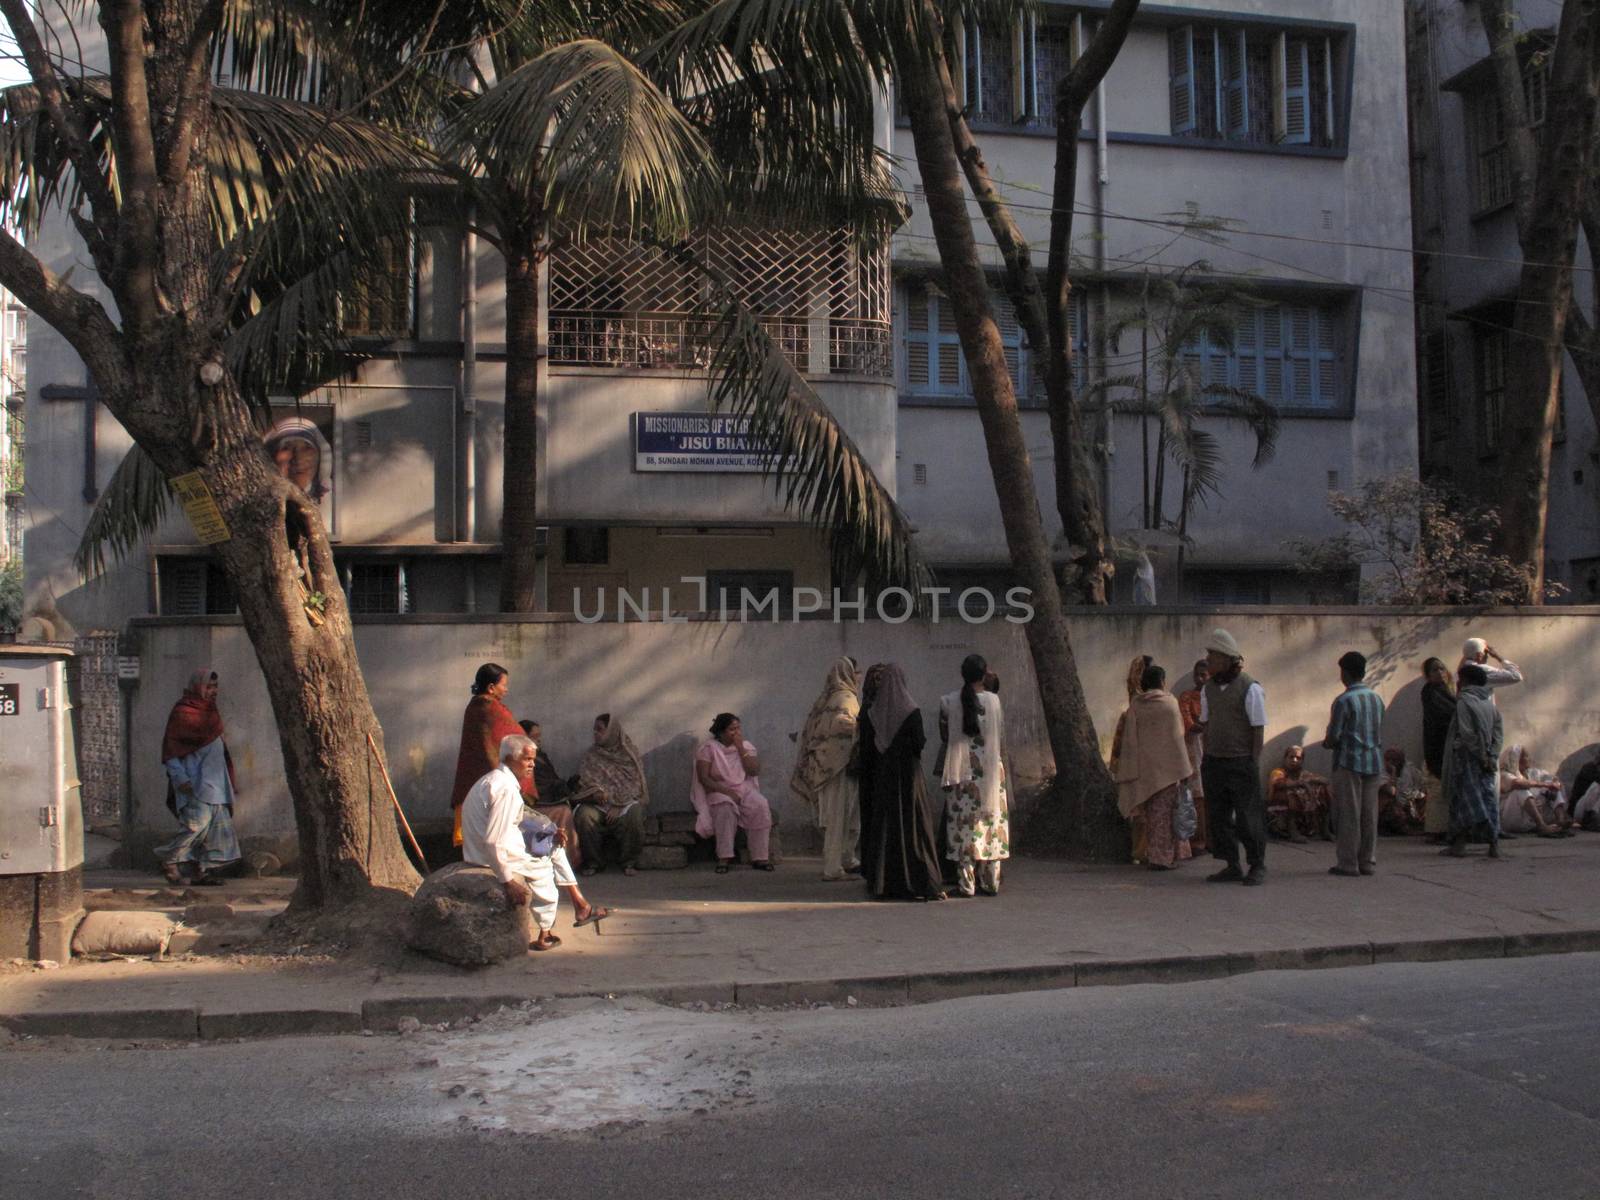 People are coming for free medical assistance in Jisu Bhavan house established by Mother Teresa and run by the Missionaries of Charity Fathers in Kolkata, India on February 03, 2009.